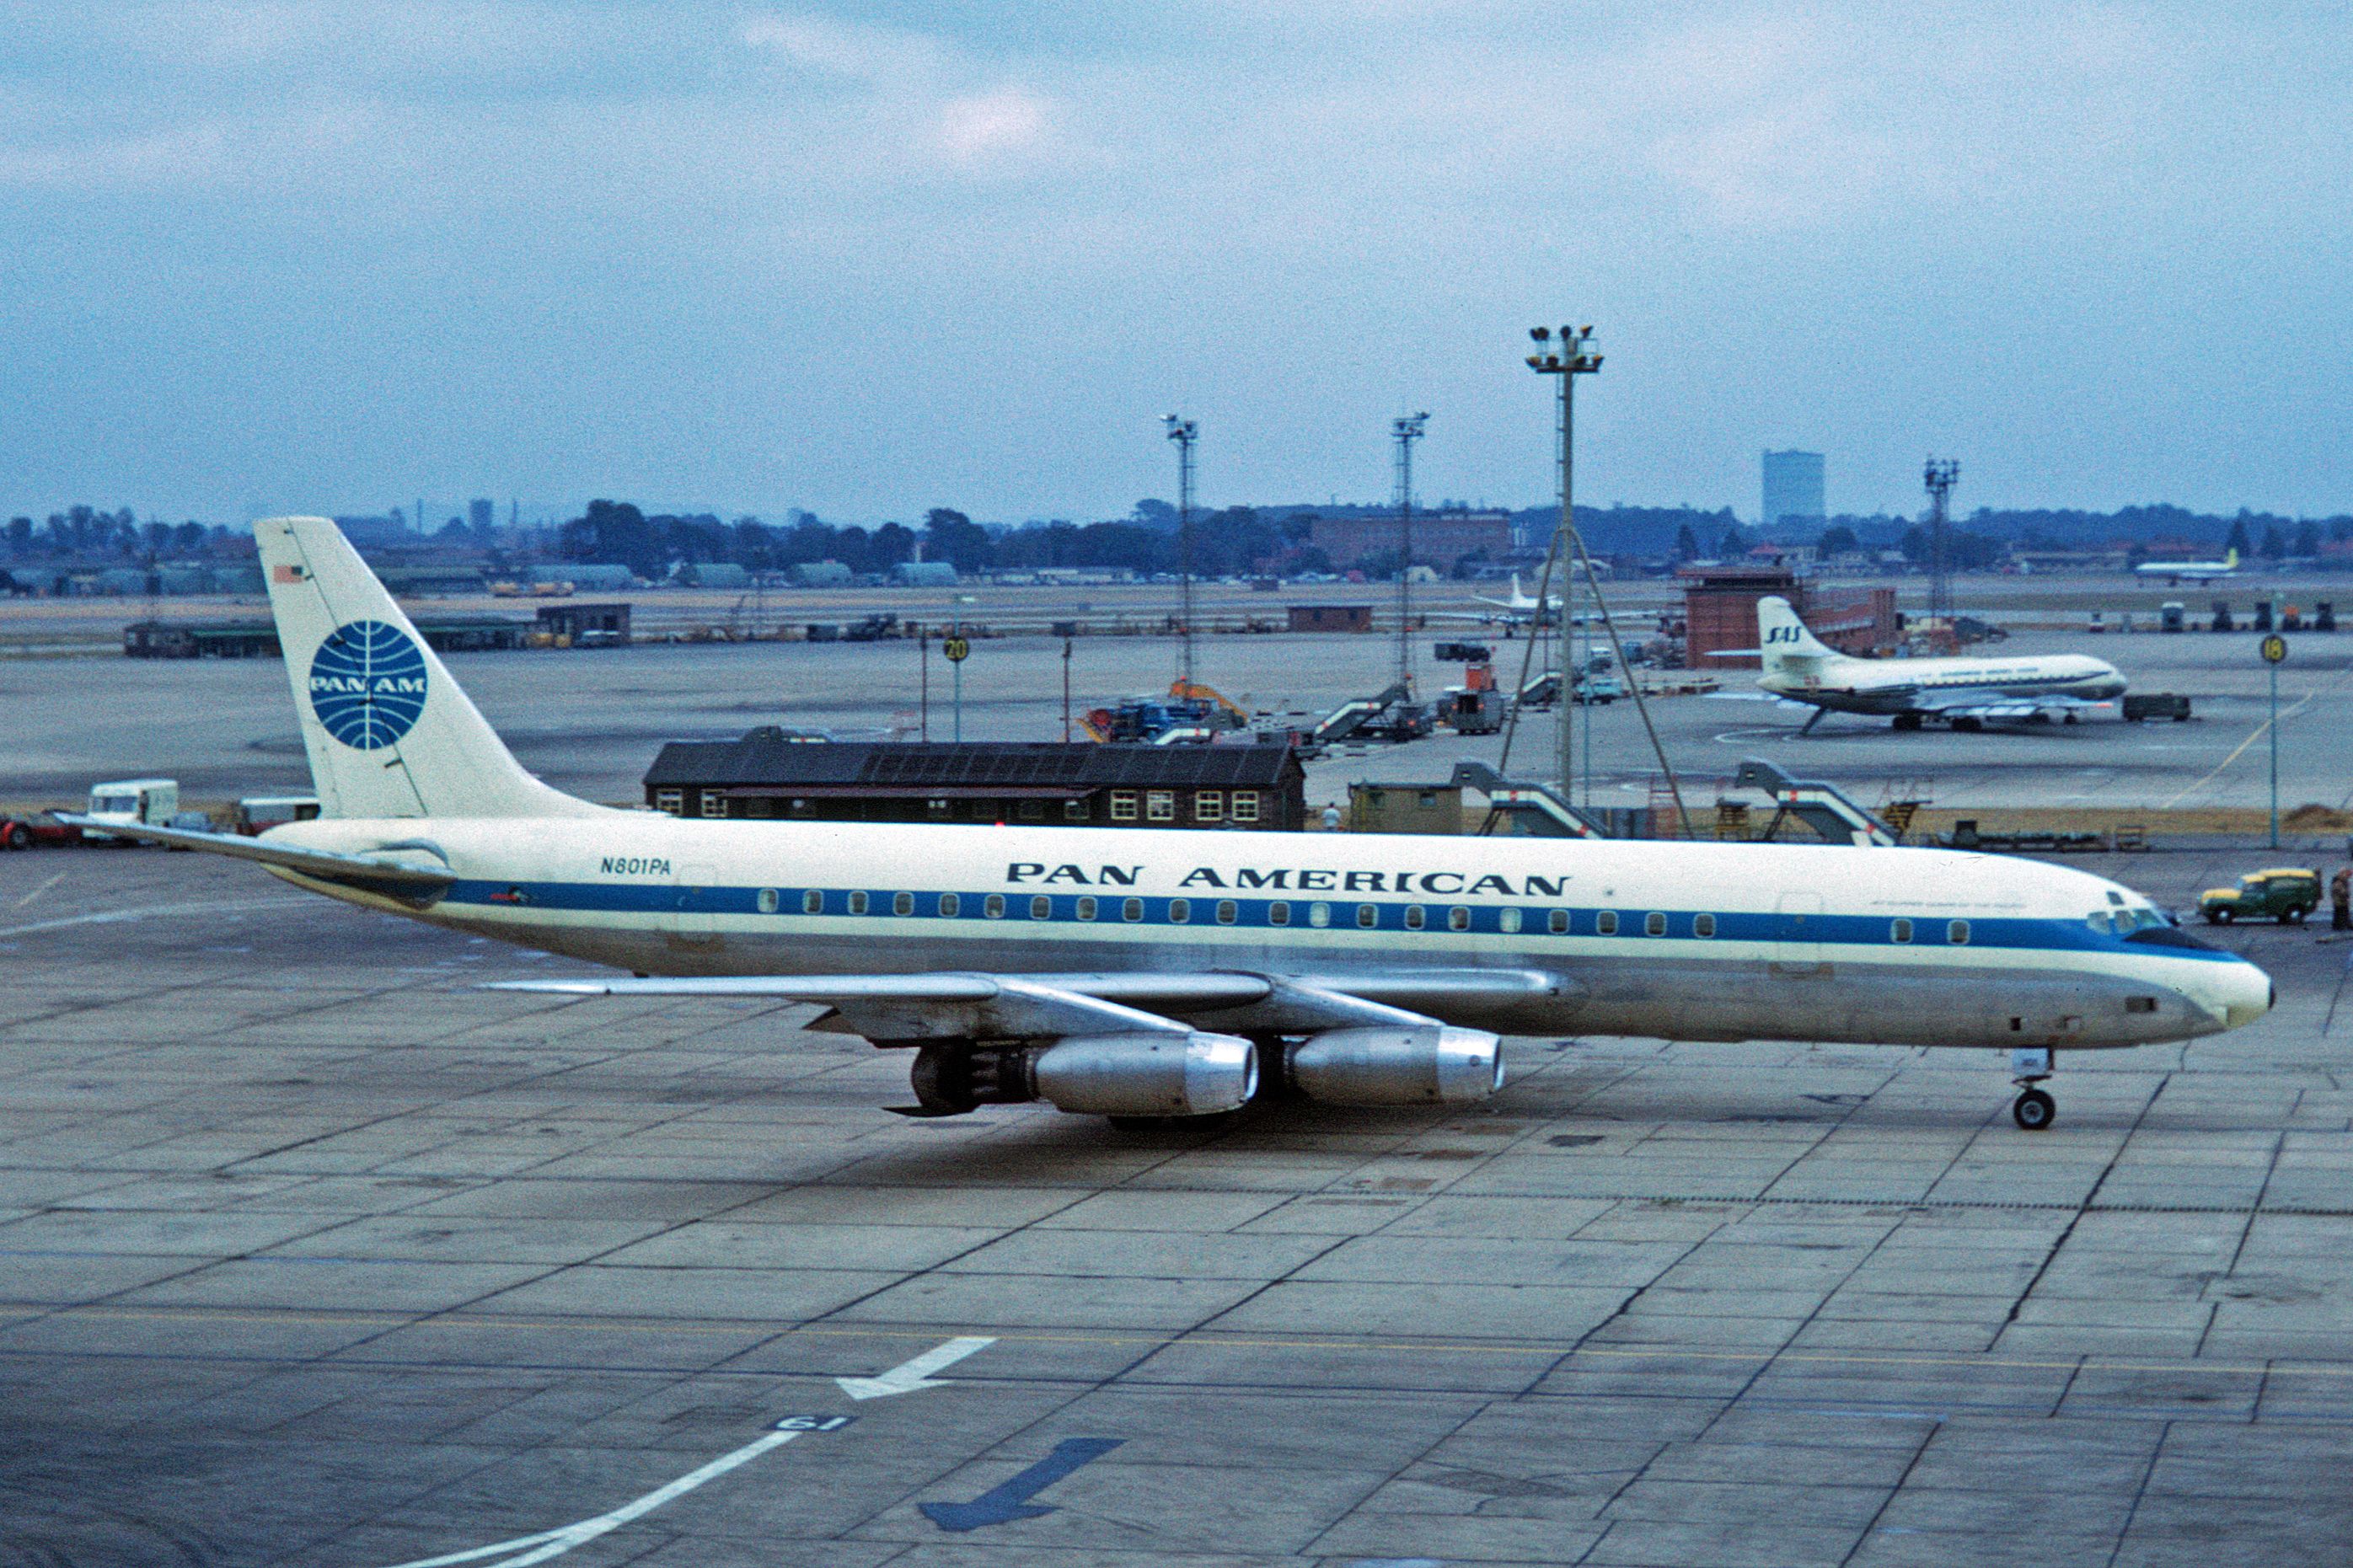 A Pan Am Douglas DC-8 parked on the apron at London Heathrow